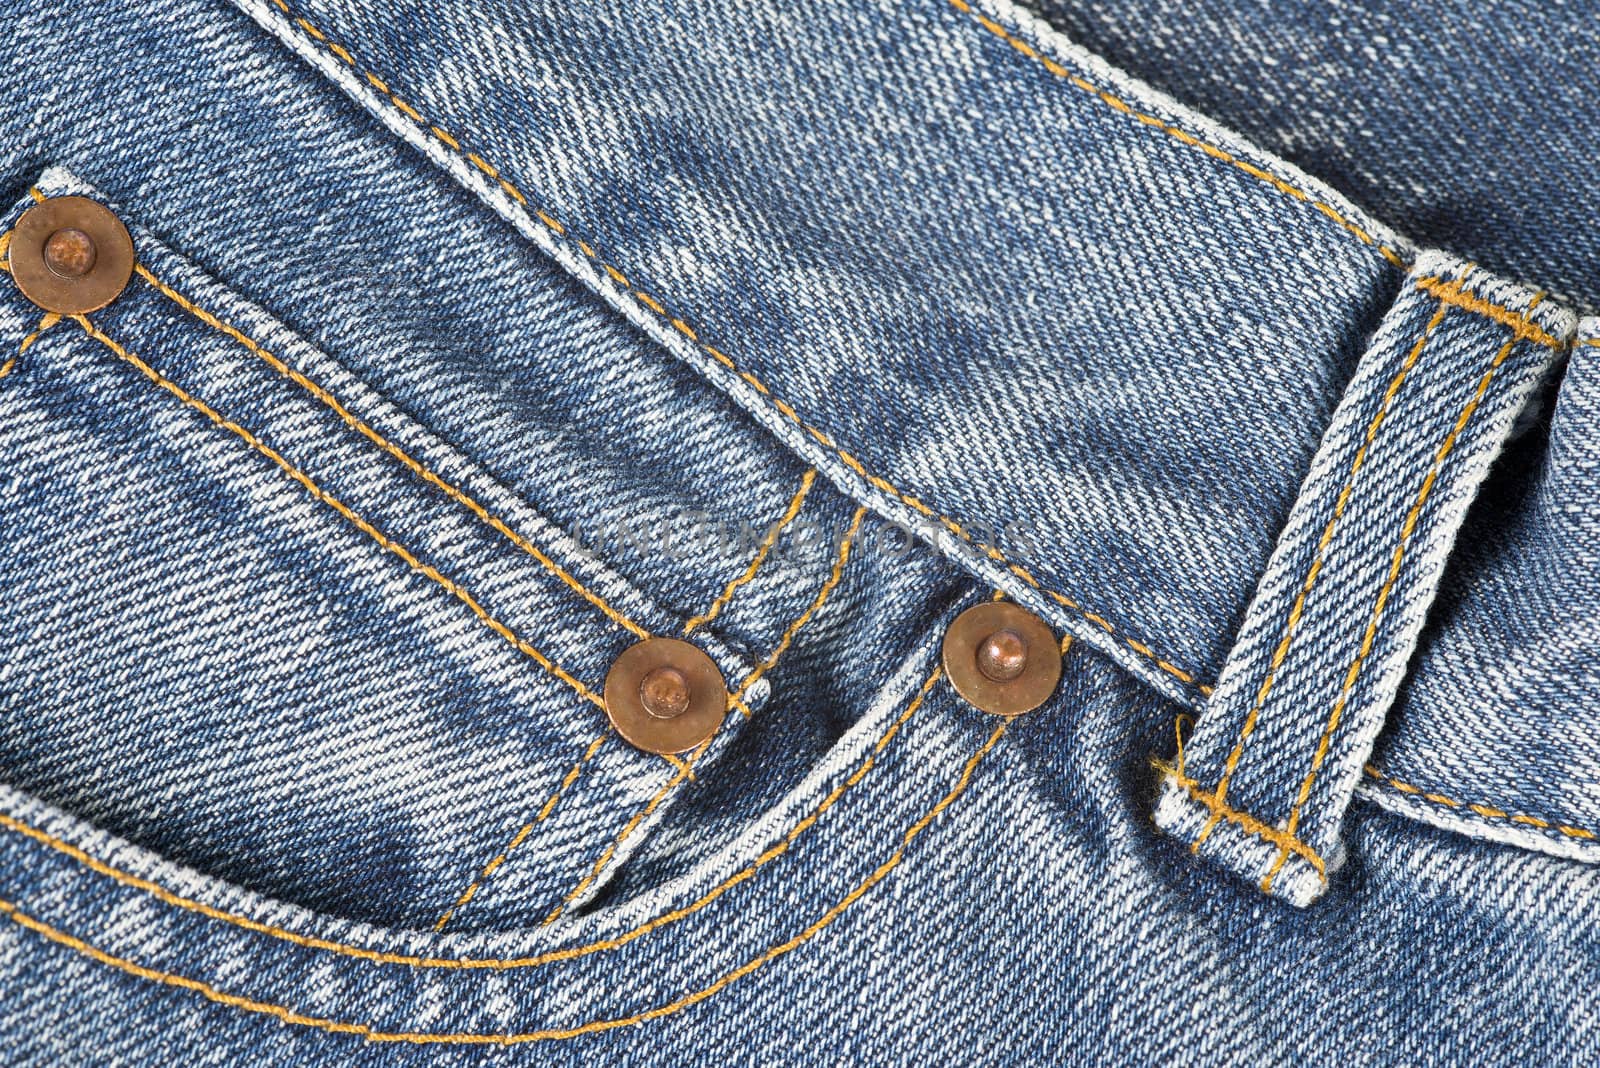 Detail of the jeans pocket by angelsimon